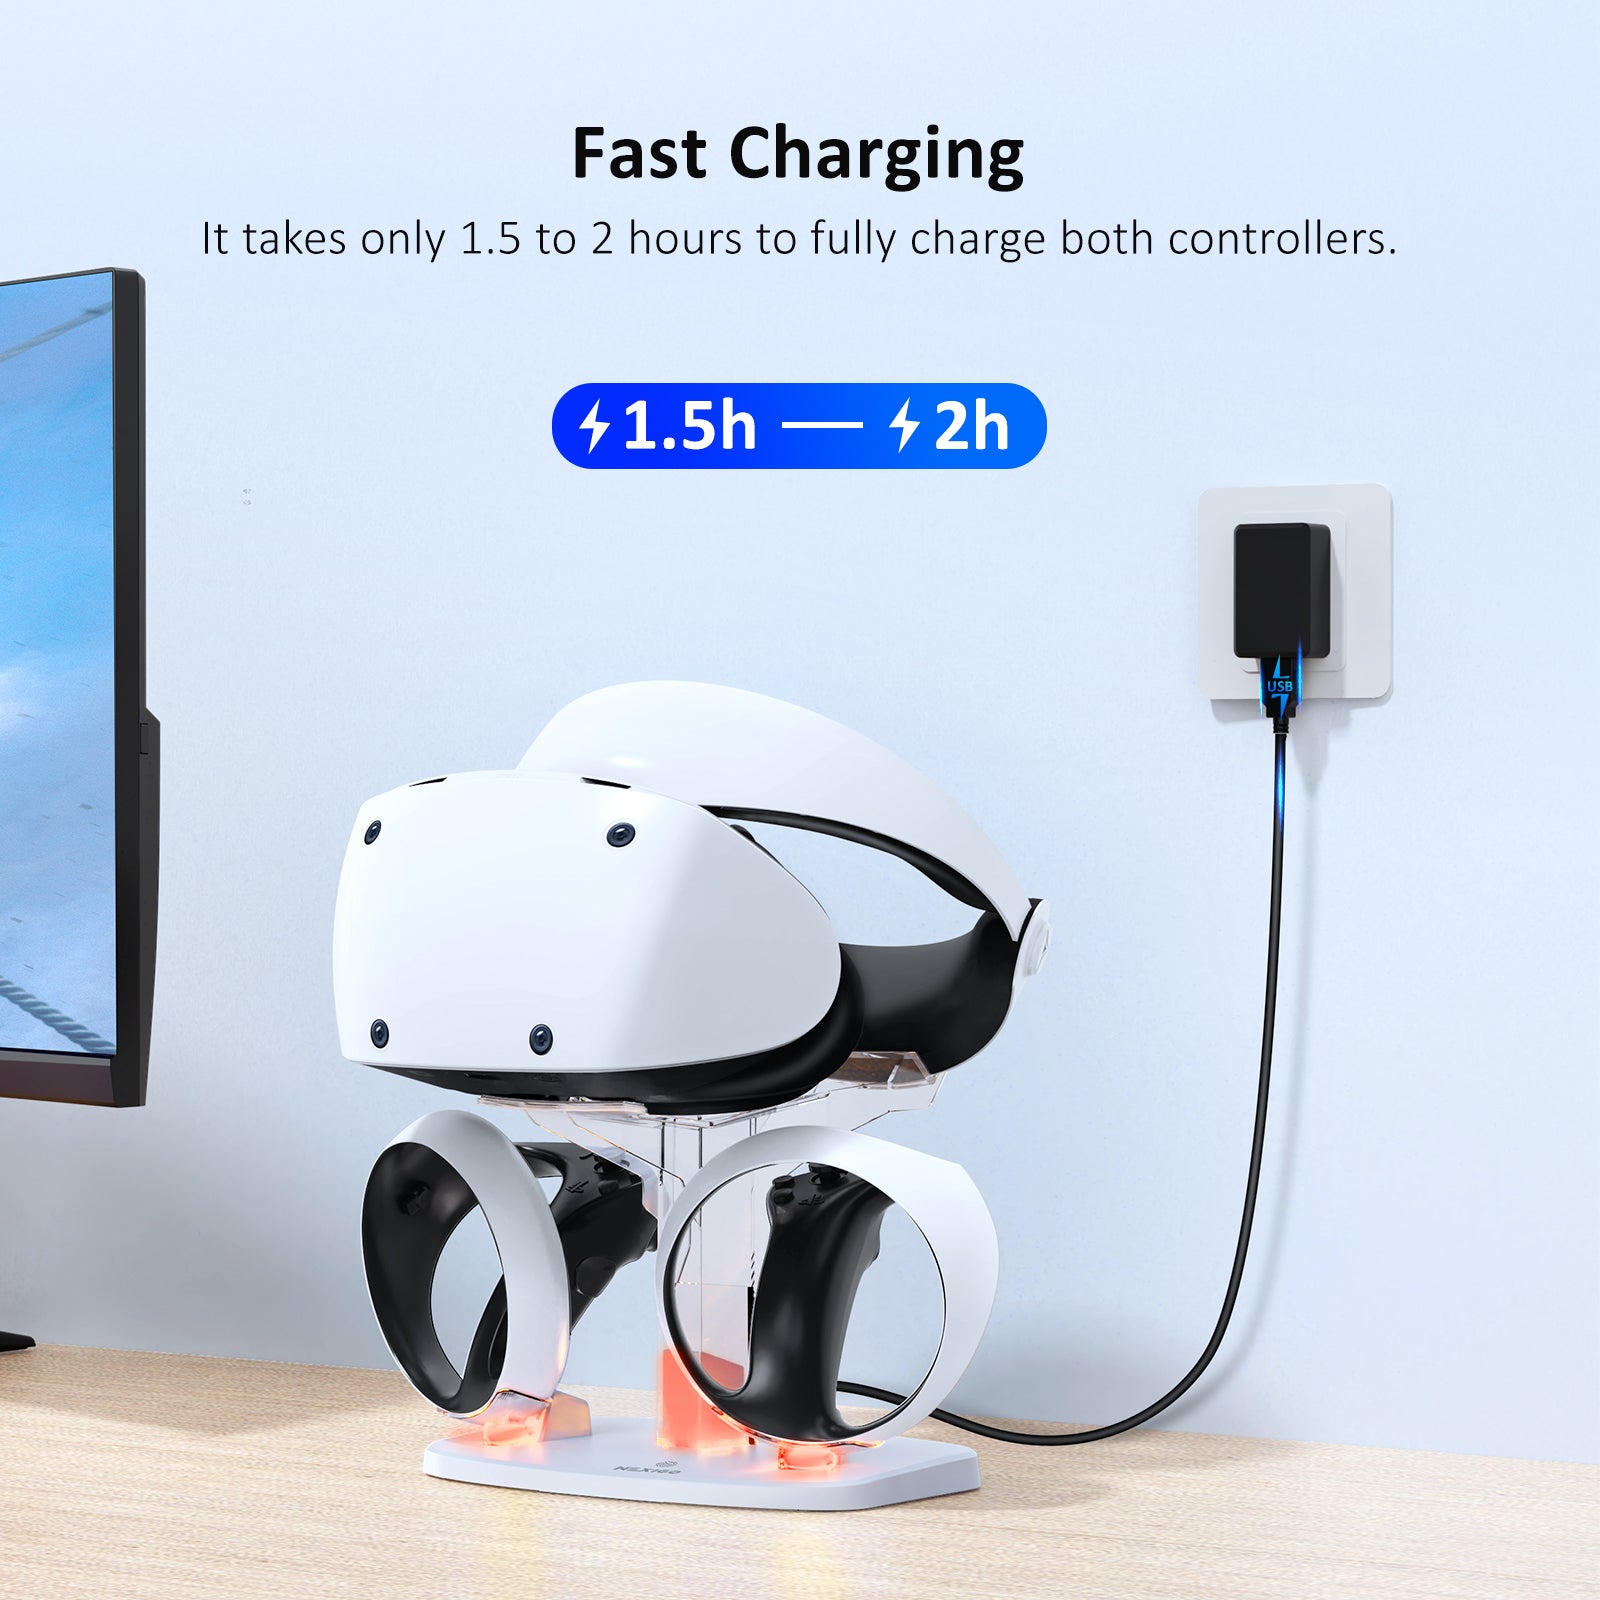 Fast charging with power adapter, only 1.5 to 2 hours to fully charge both controllers.